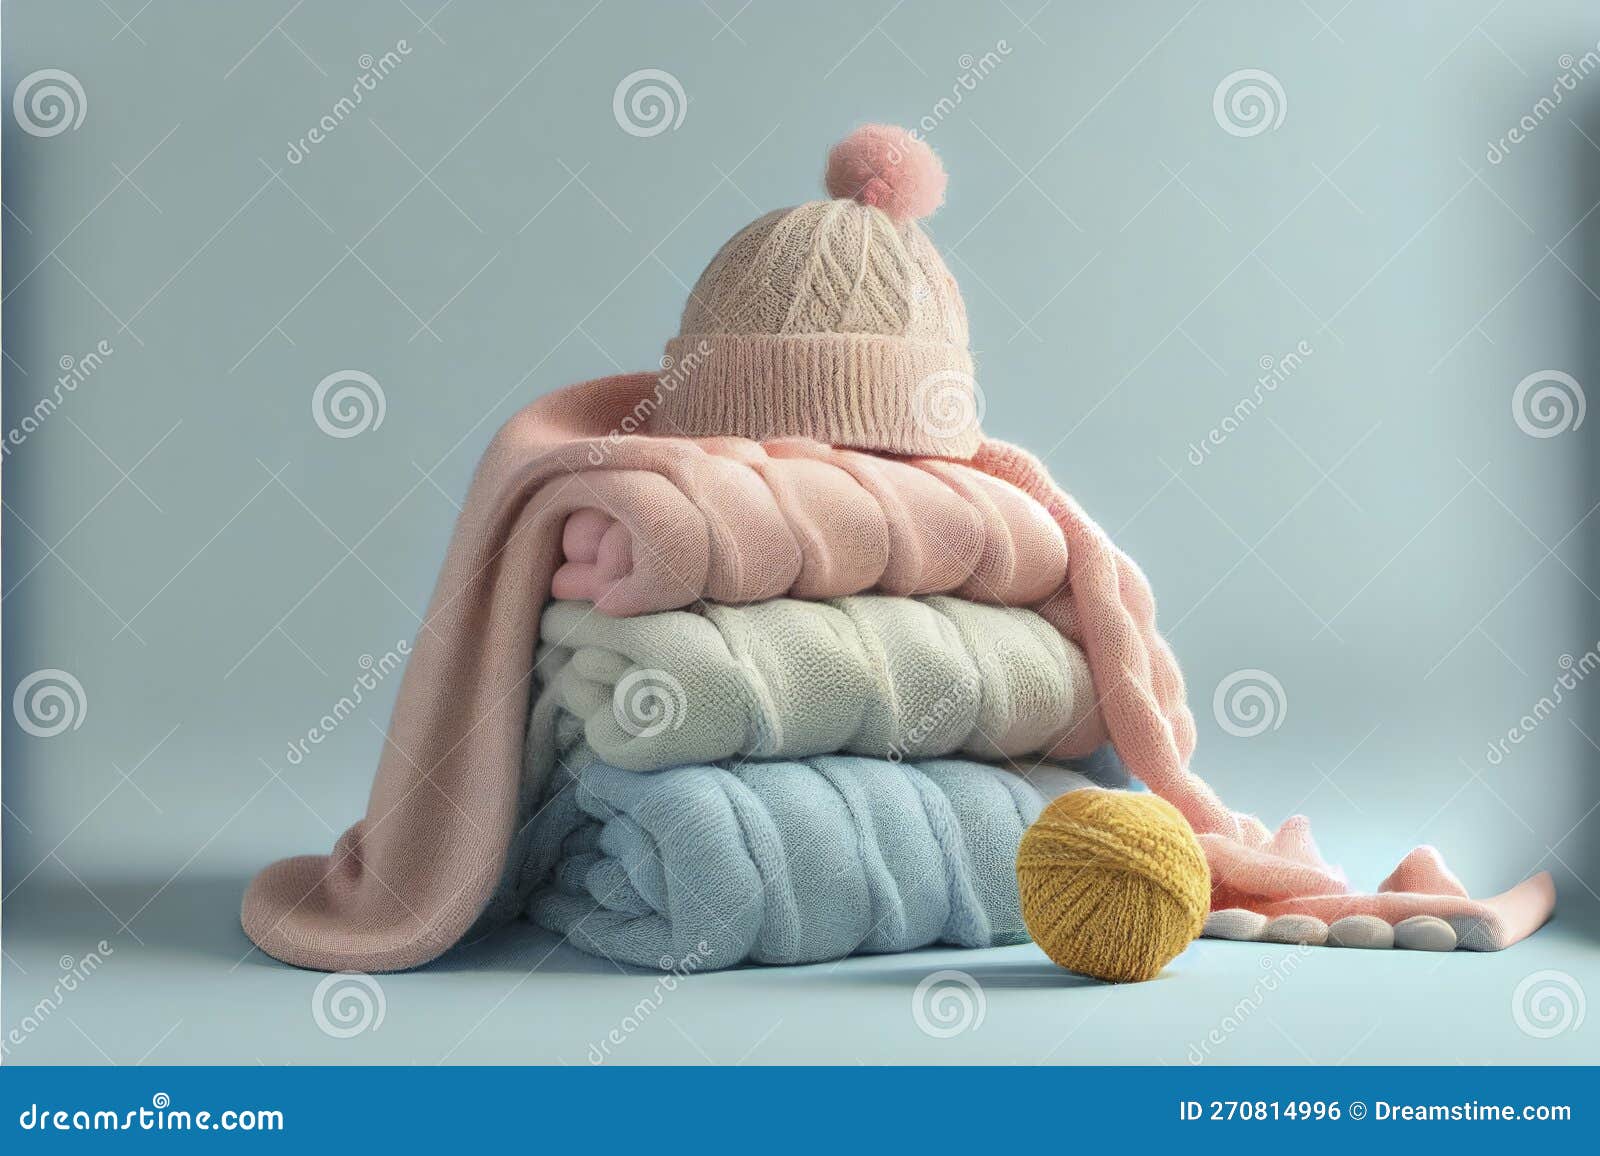 bunch of stacked knitted pastel color sweaters scarf and hat with different knitting patterns folded on light background.